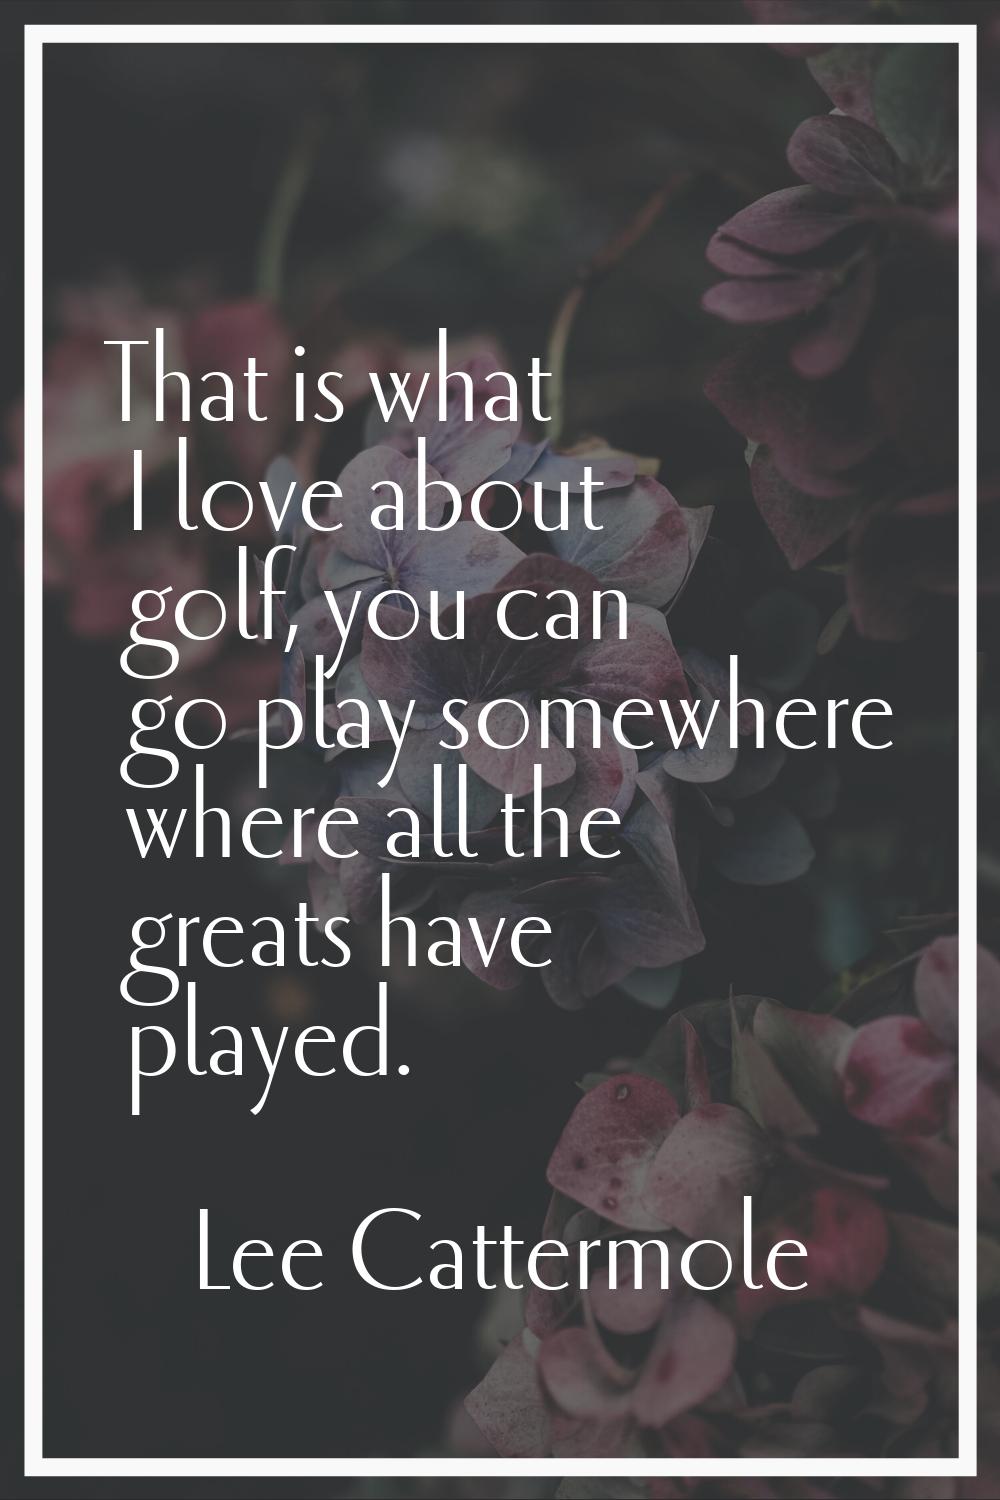 That is what I love about golf, you can go play somewhere where all the greats have played.